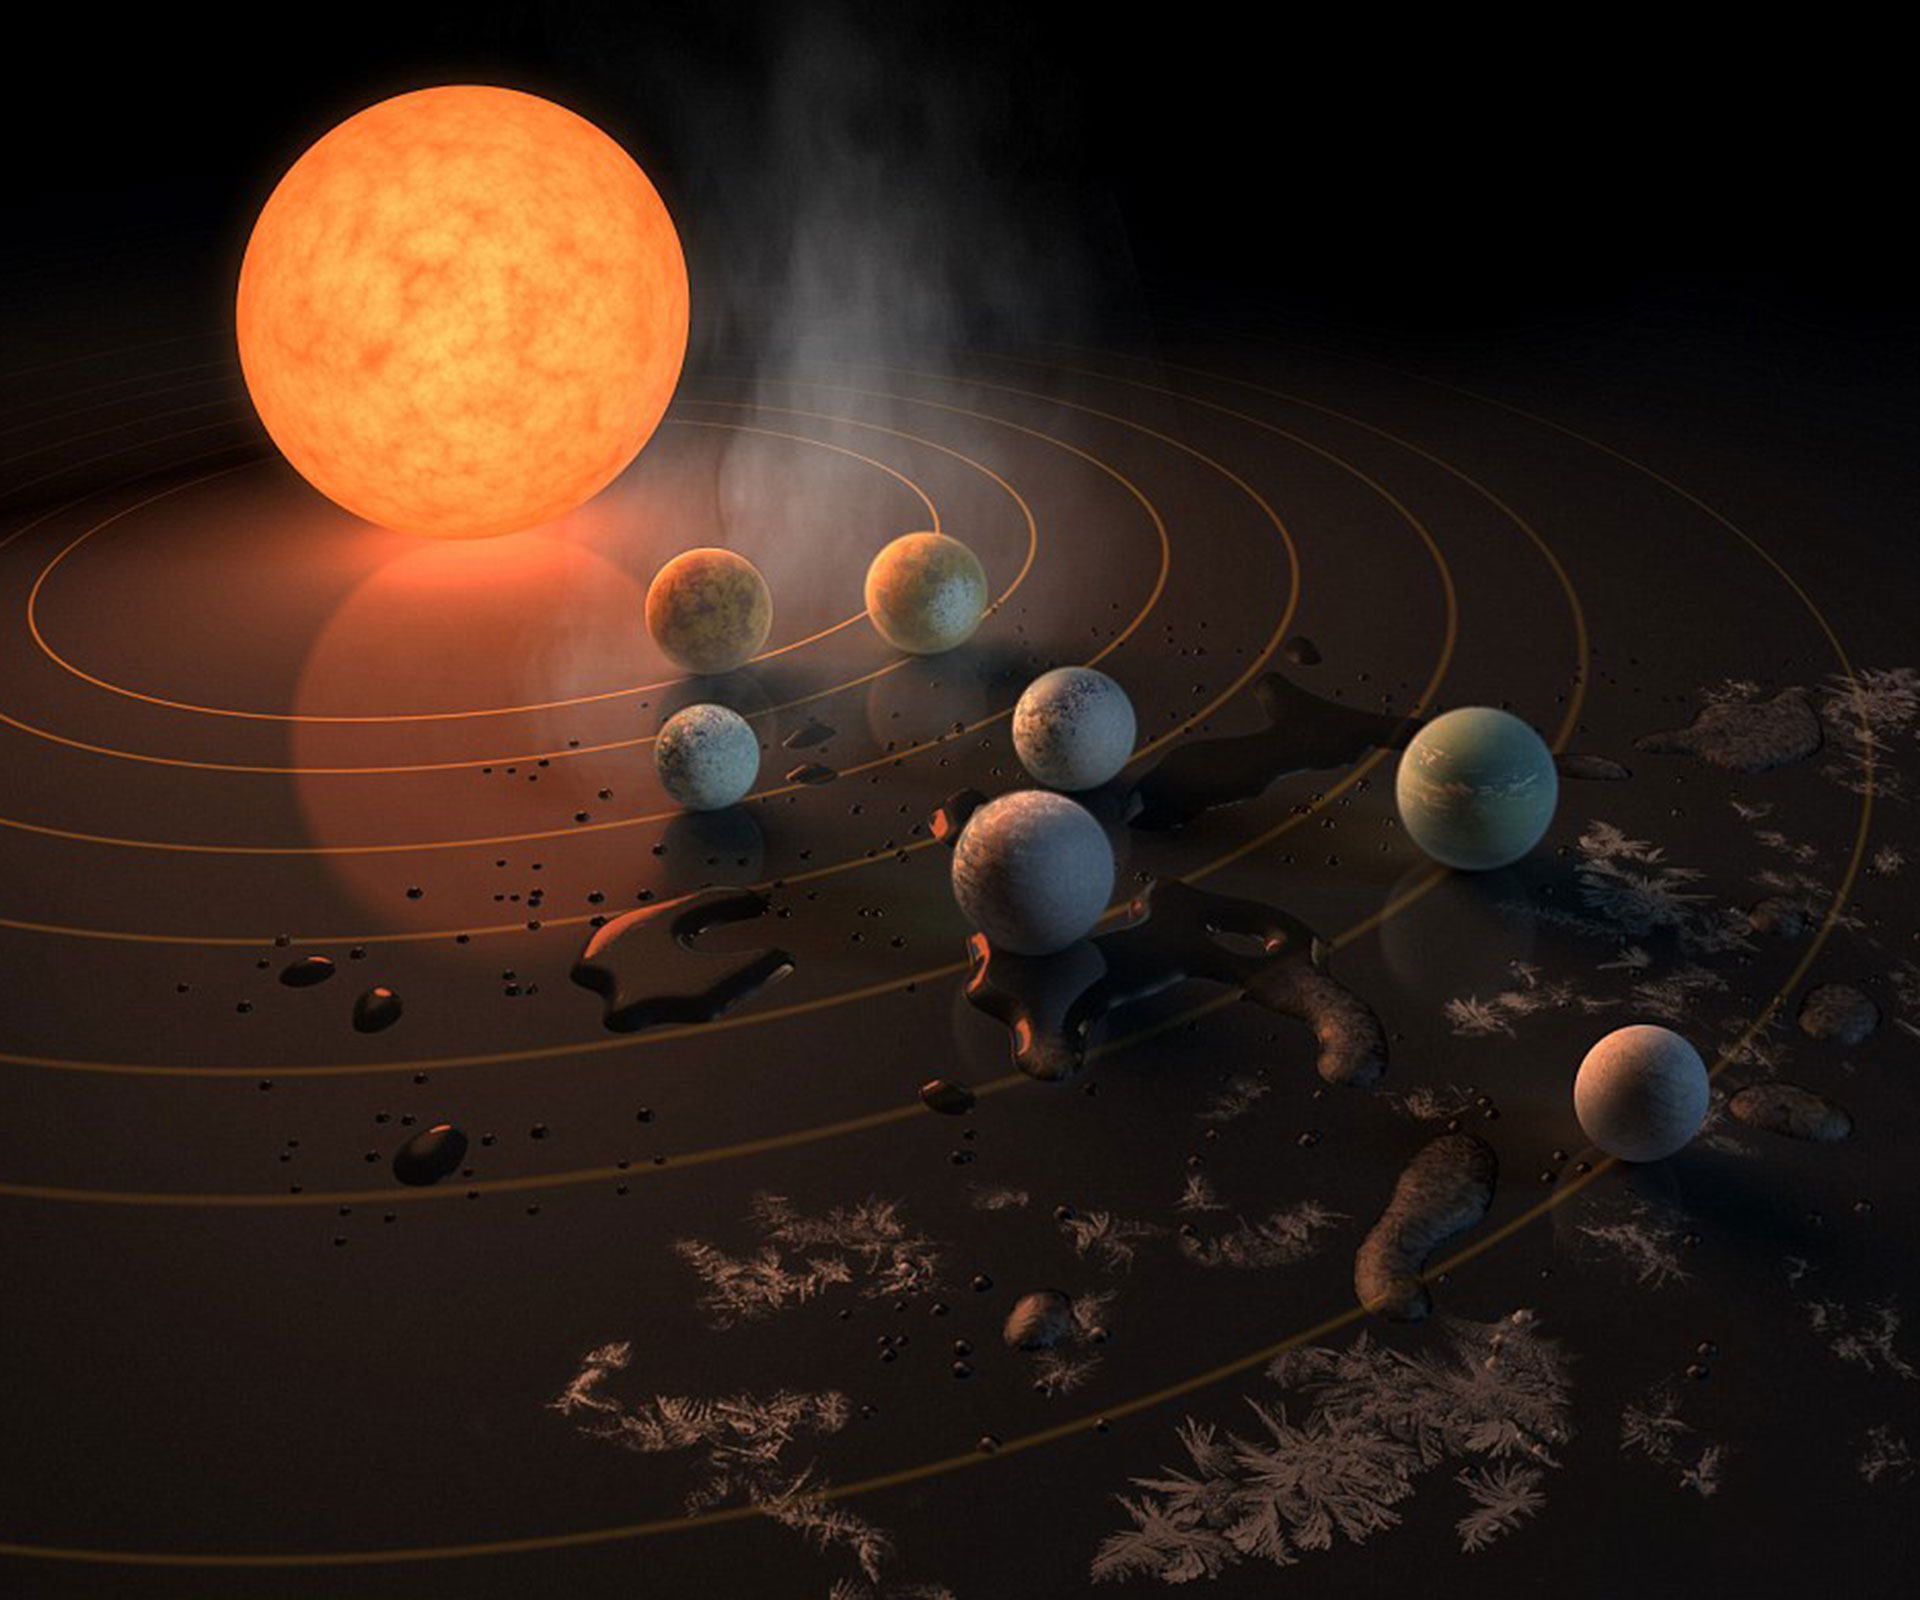 Nasa just announced they’ve found an entire new solar system